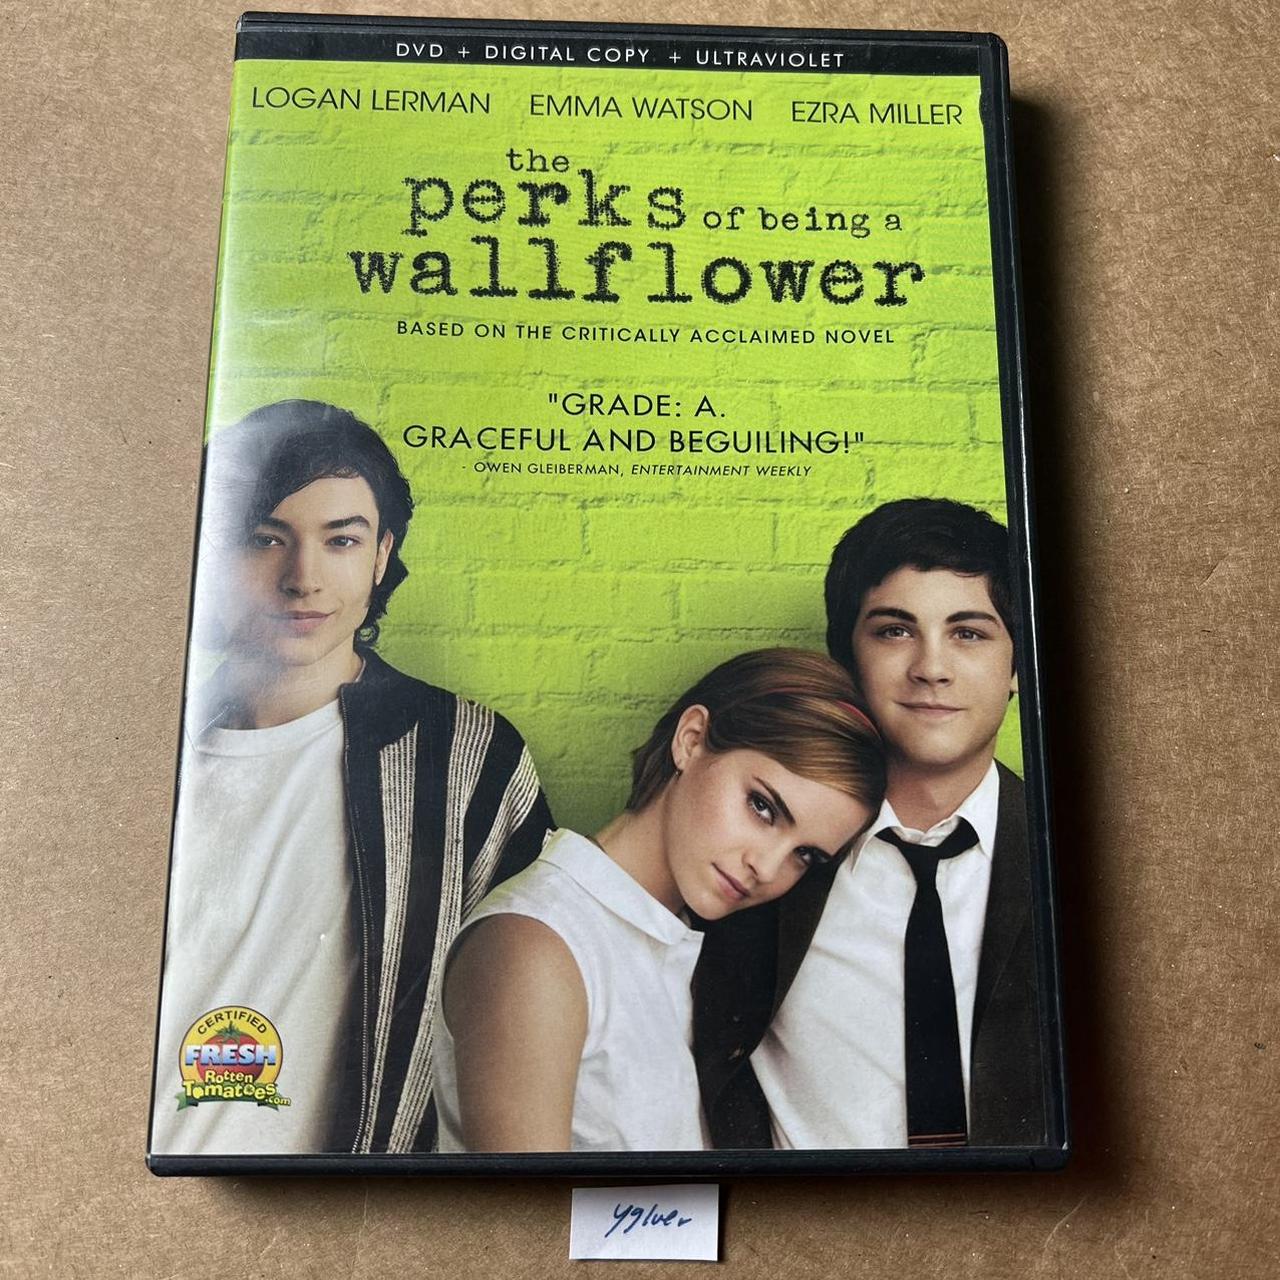  The Perks of Being a Wallflower (Blu-ray + Digital